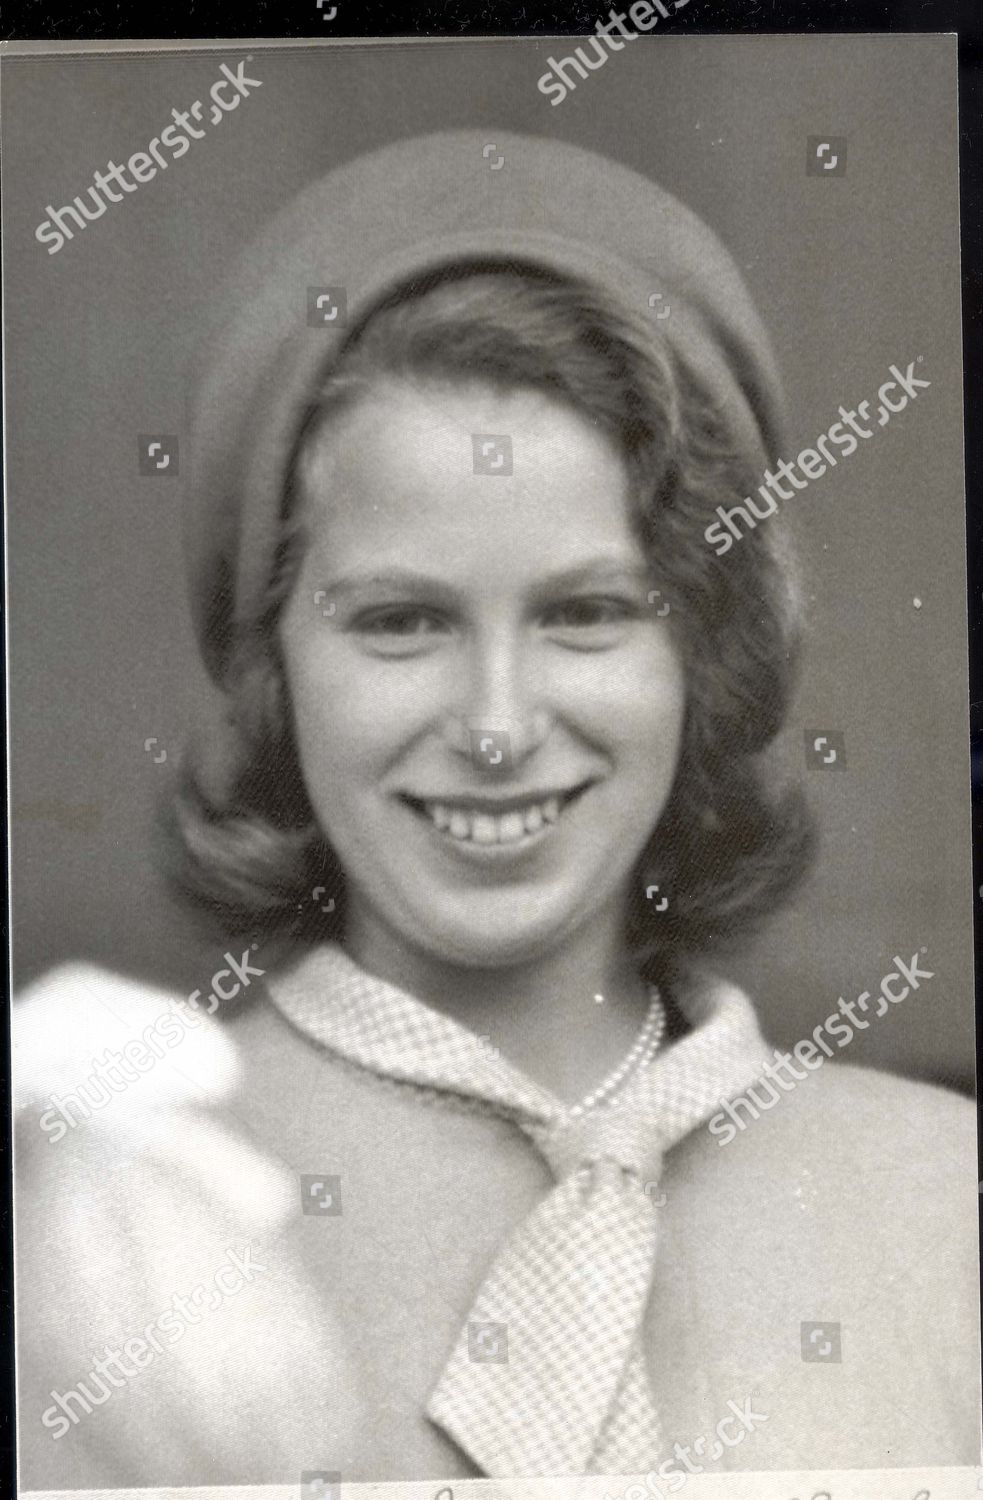 princess-anne-now-princess-royal-1964-picture-shows-princess-anne-at-the-braemar-gathering-shutterstock-editorial-891729a.jpg